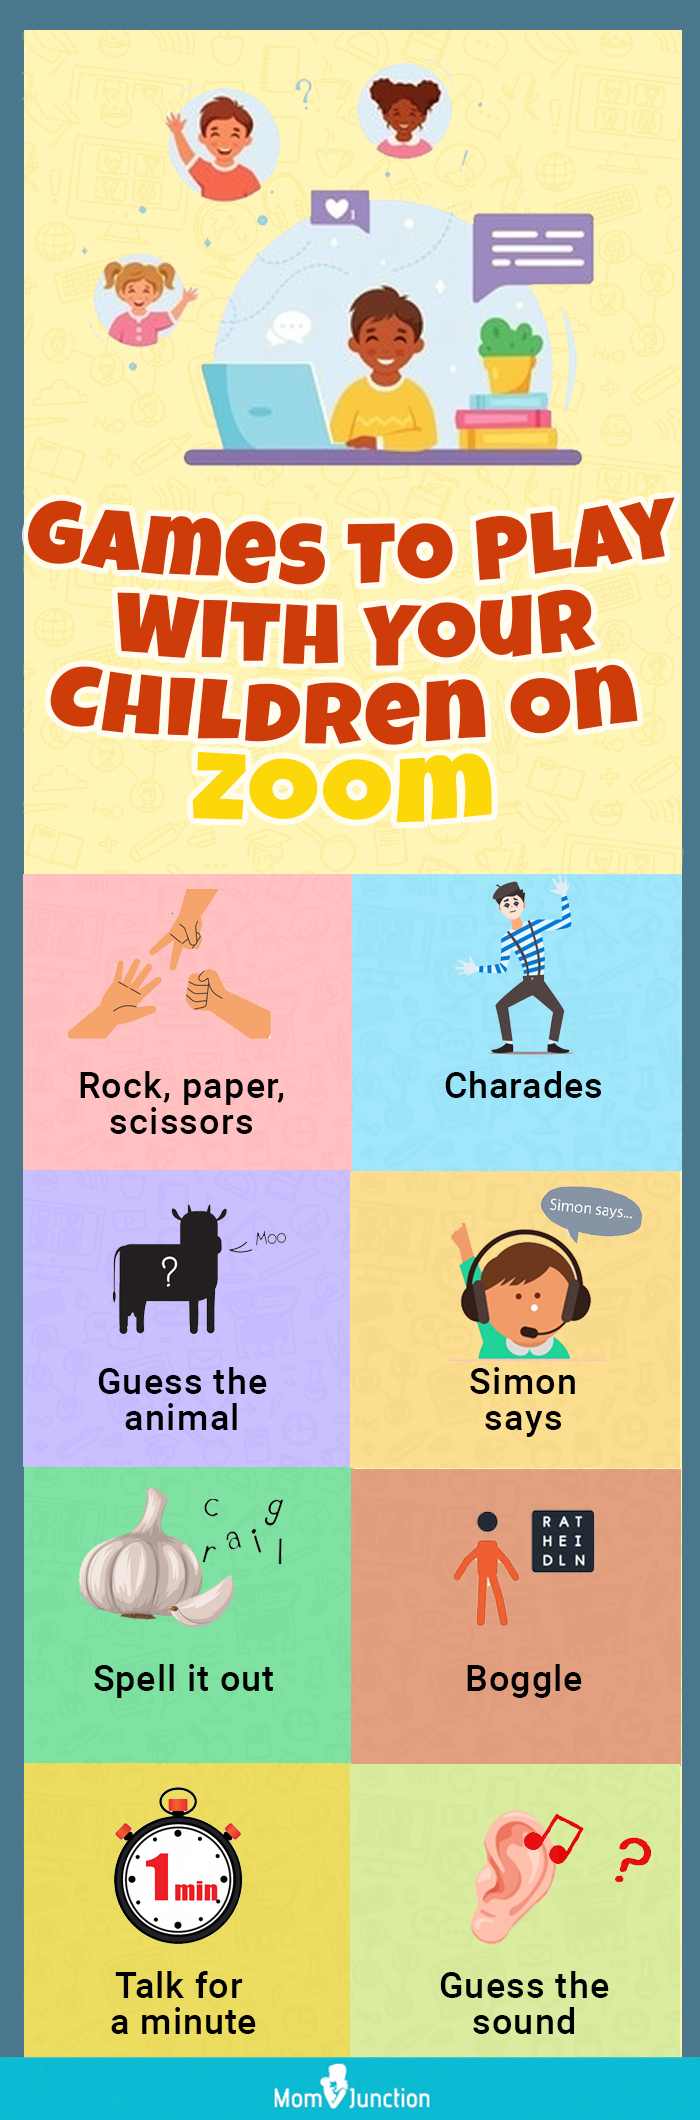 25 Fun Games to Play on Zoom With Your Students